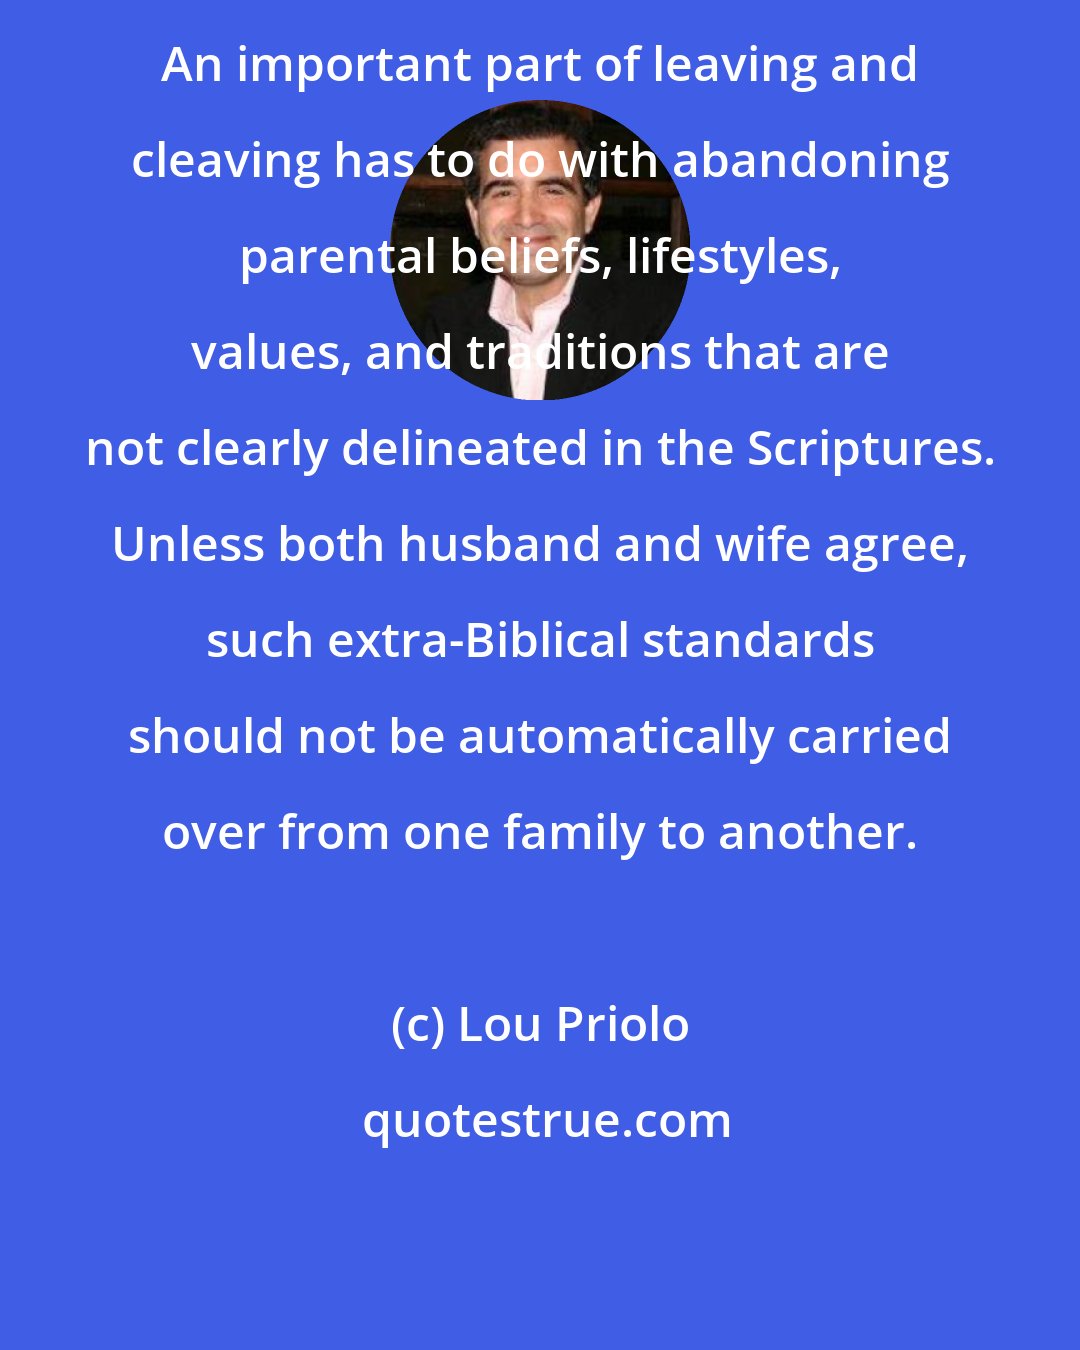 Lou Priolo: An important part of leaving and cleaving has to do with abandoning parental beliefs, lifestyles, values, and traditions that are not clearly delineated in the Scriptures. Unless both husband and wife agree, such extra-Biblical standards should not be automatically carried over from one family to another.